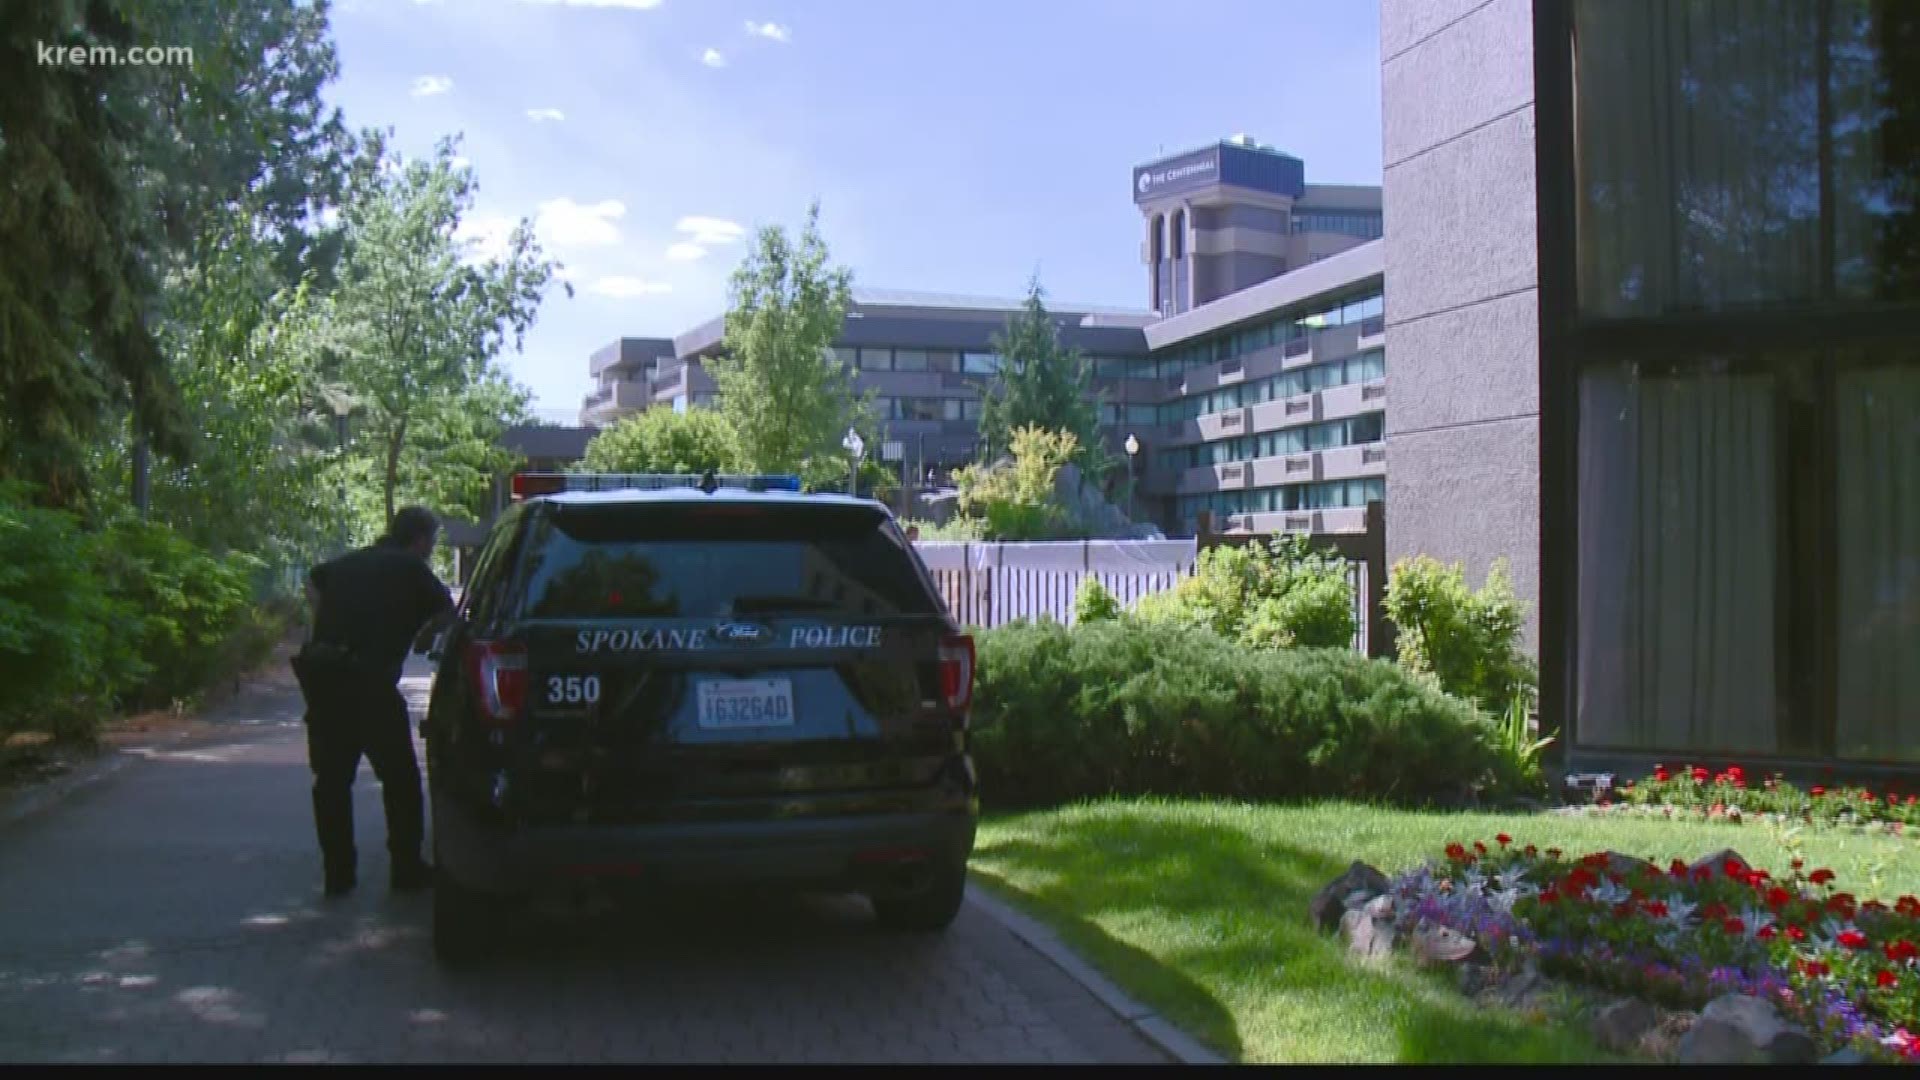 A woman drowned at the Centennial Hotel in Spokane, near Riverfront Park, according to the Spokane Police Department.